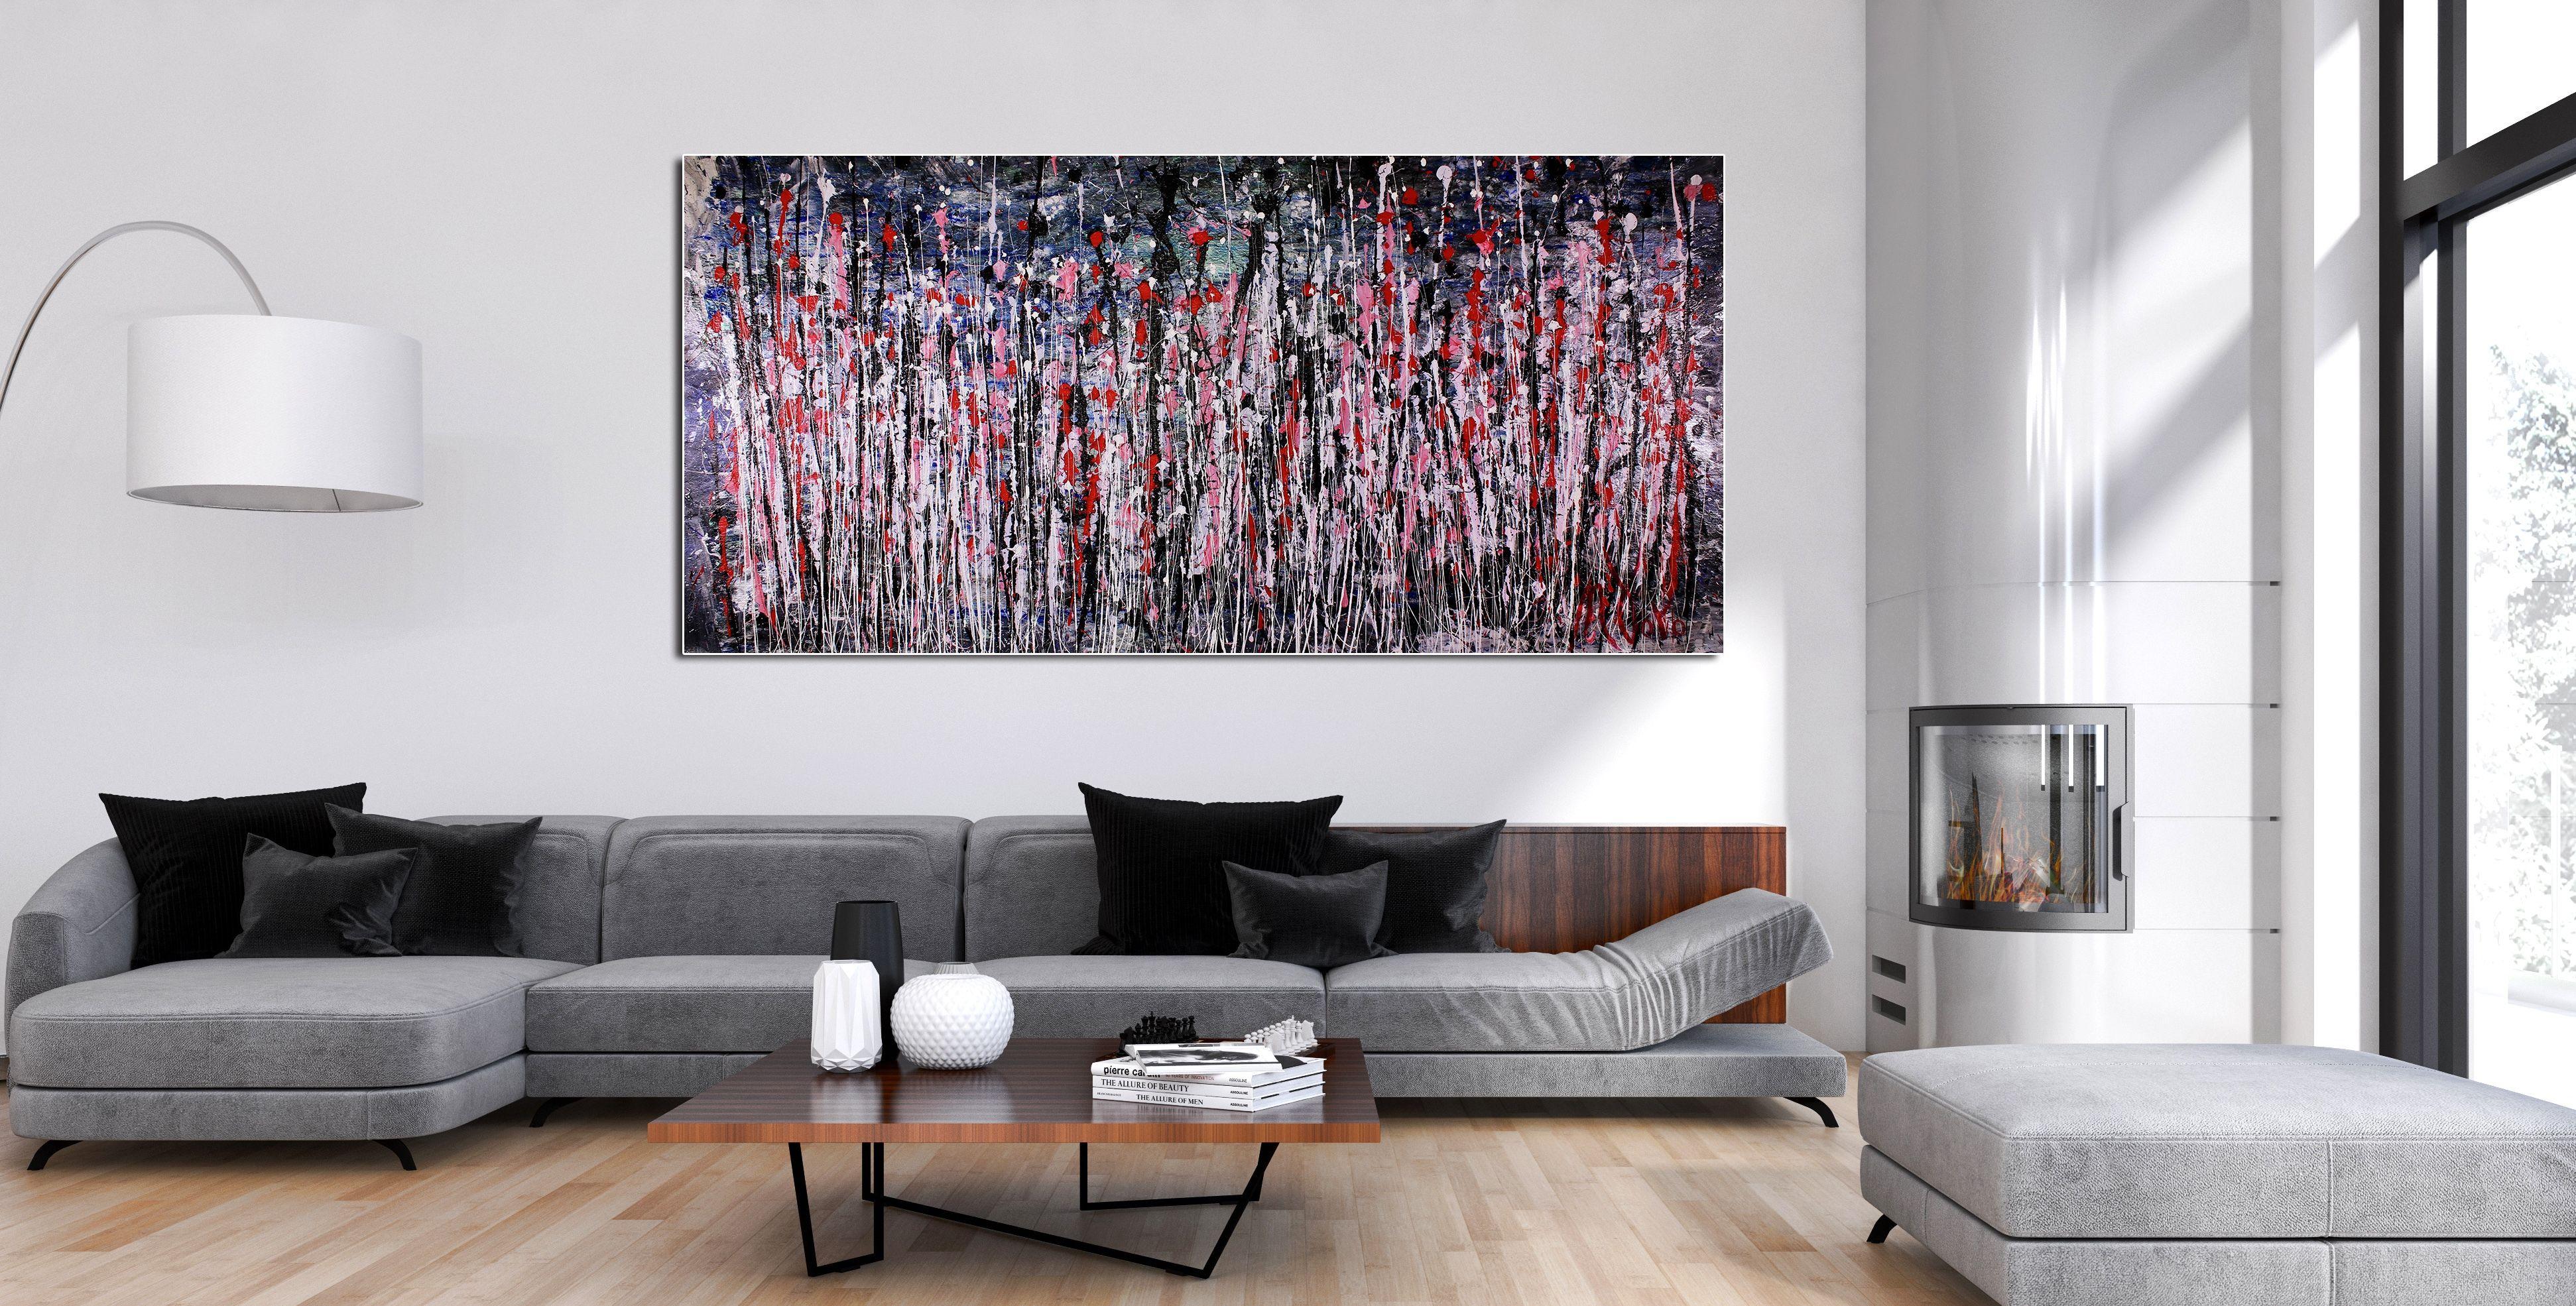 DARK, IMPACTFUL, STATEMENT ARTWORK!    Dark iridescent glossy background and color drips for this very contemplative painting. Colors include dark colors, red, pink, white, and some pearl. Very expressive abstract painting.     This work was created